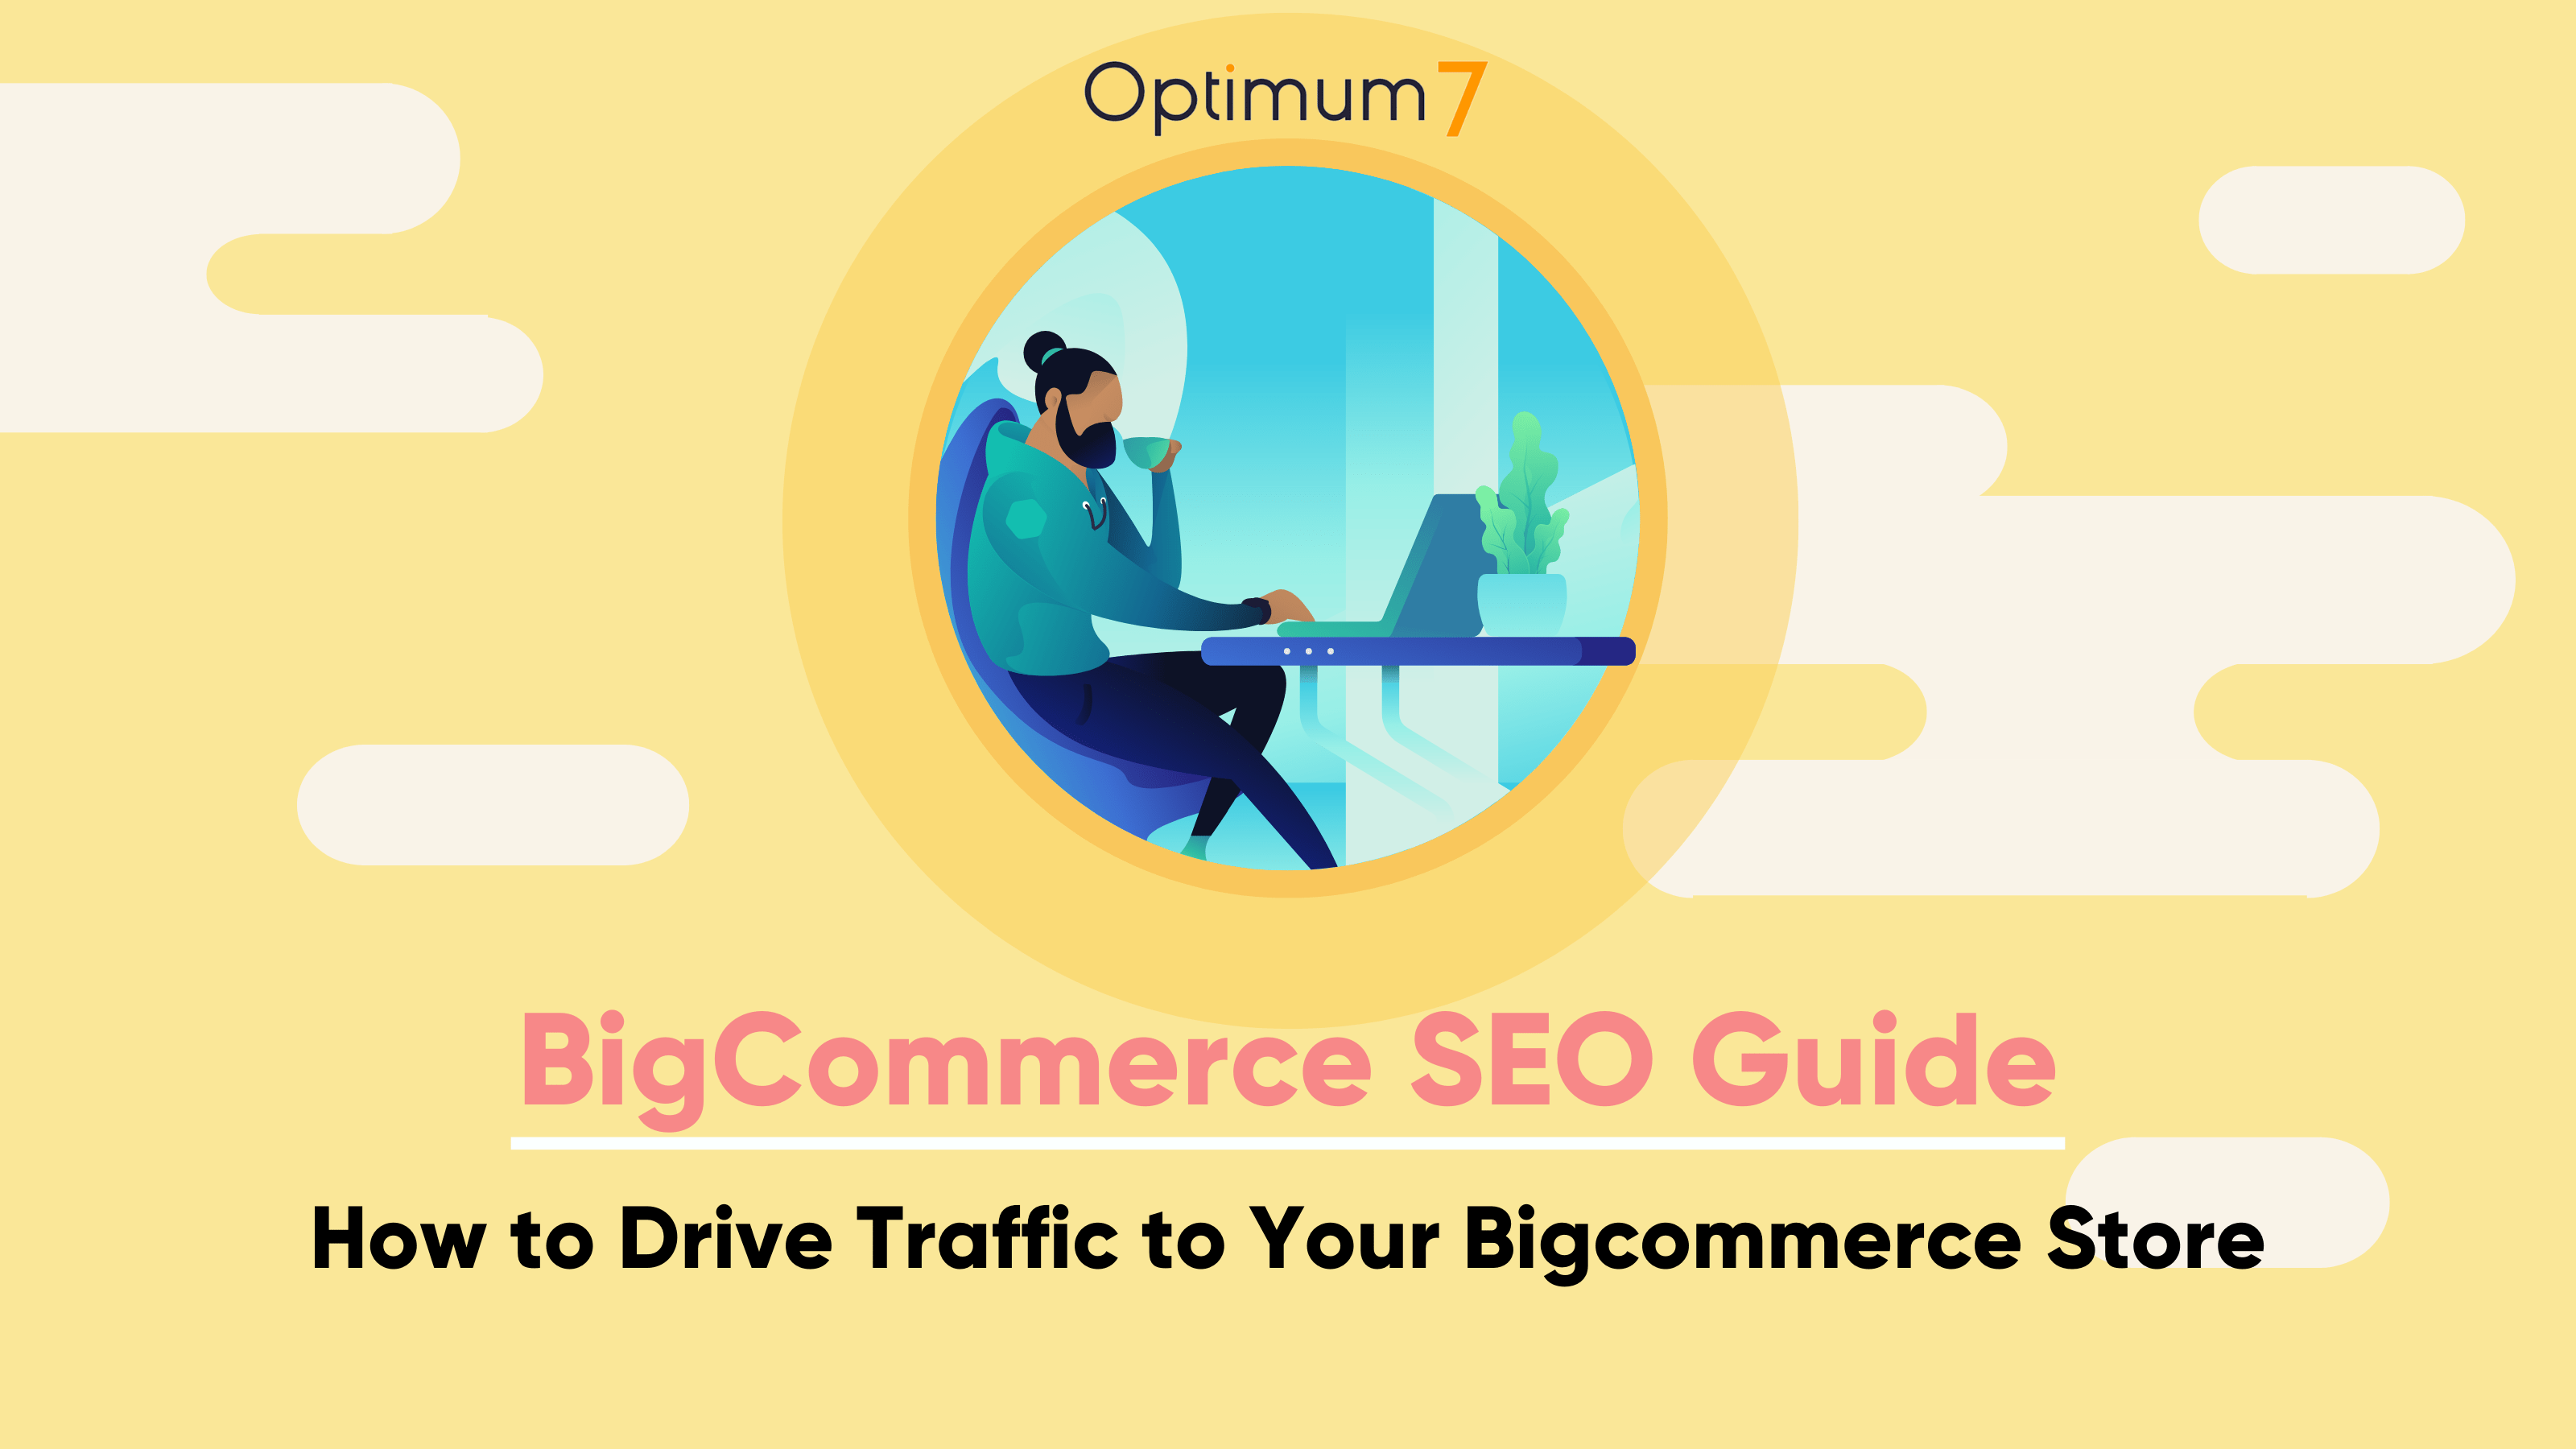 BigCommerce SEO Guide: How to Drive Traffic to Your BigCommerce Store